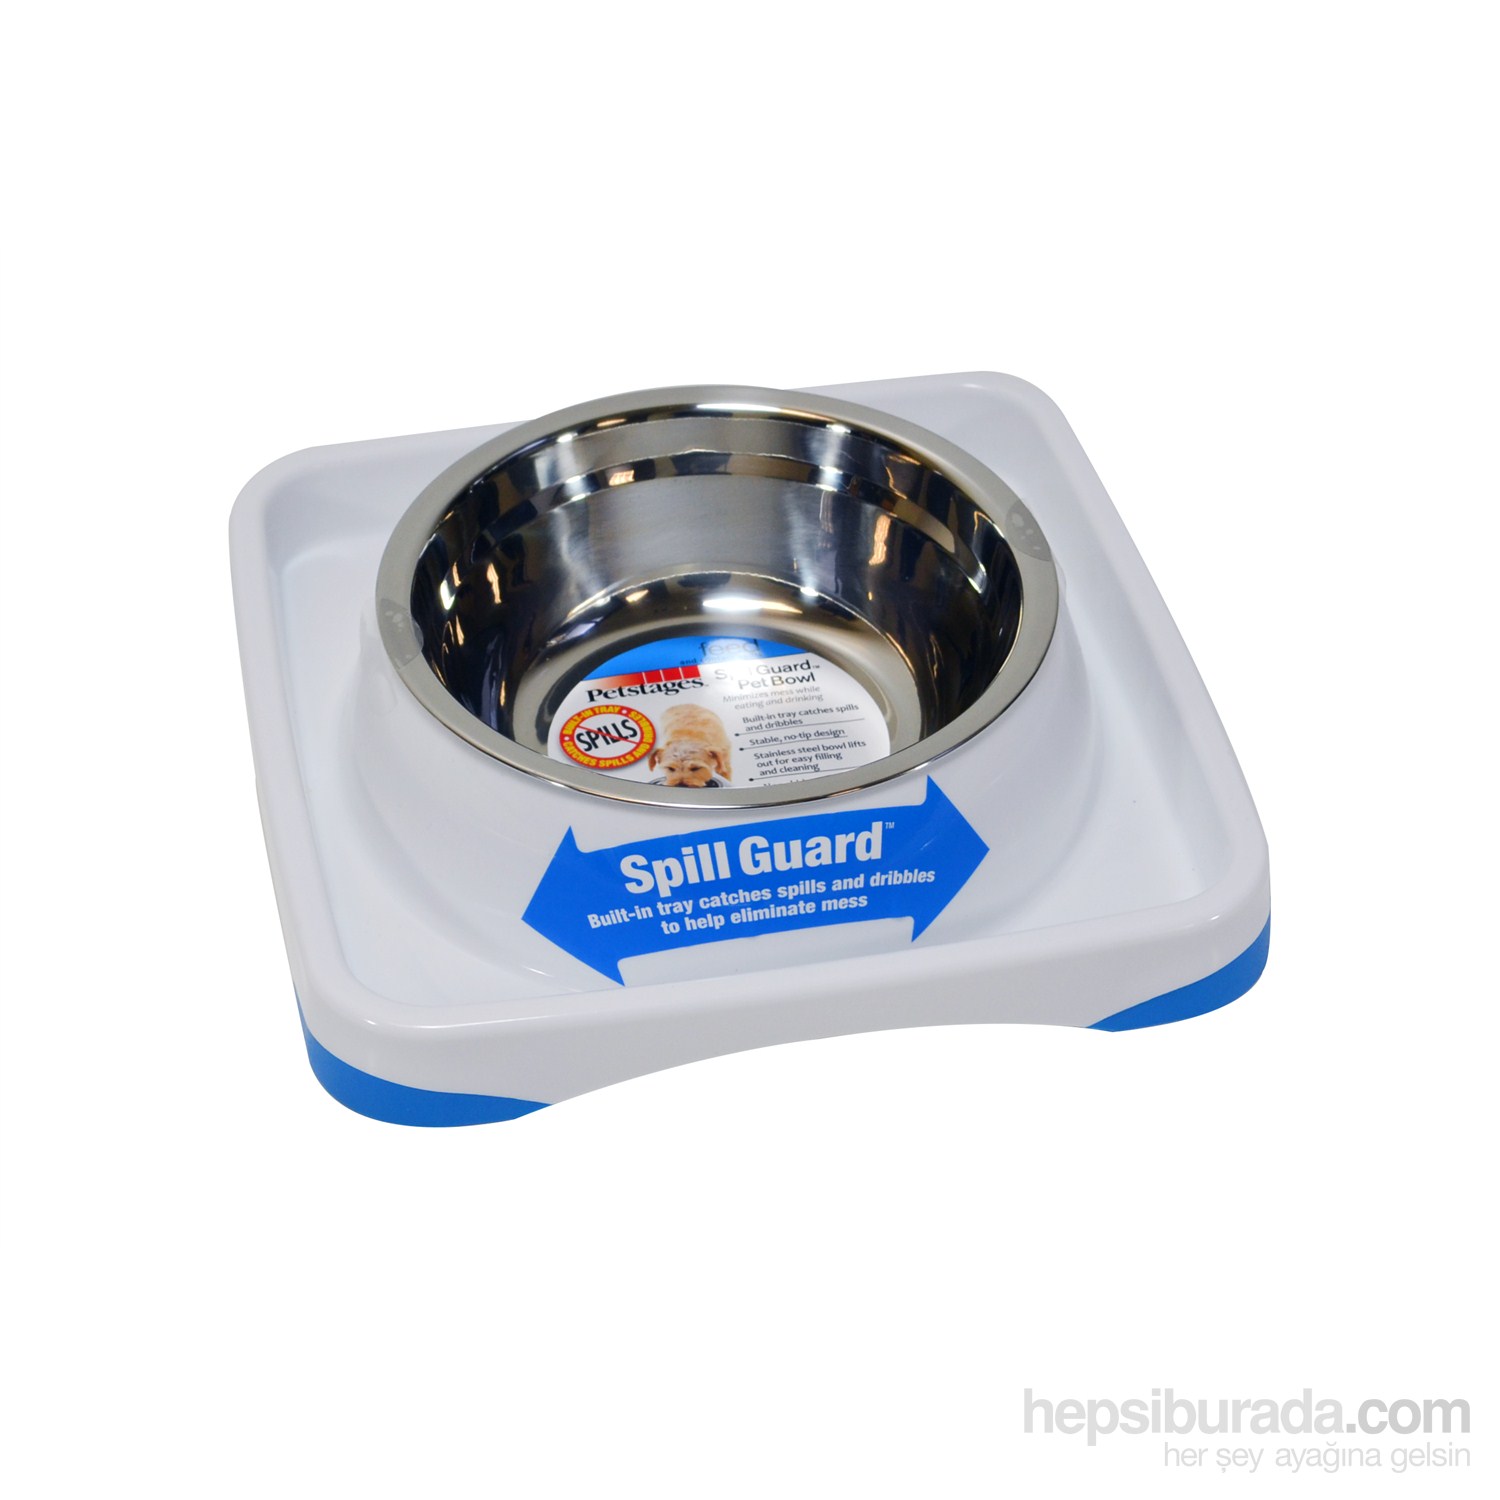 Petstages Spill Guard Pet Bowl - 2 cup